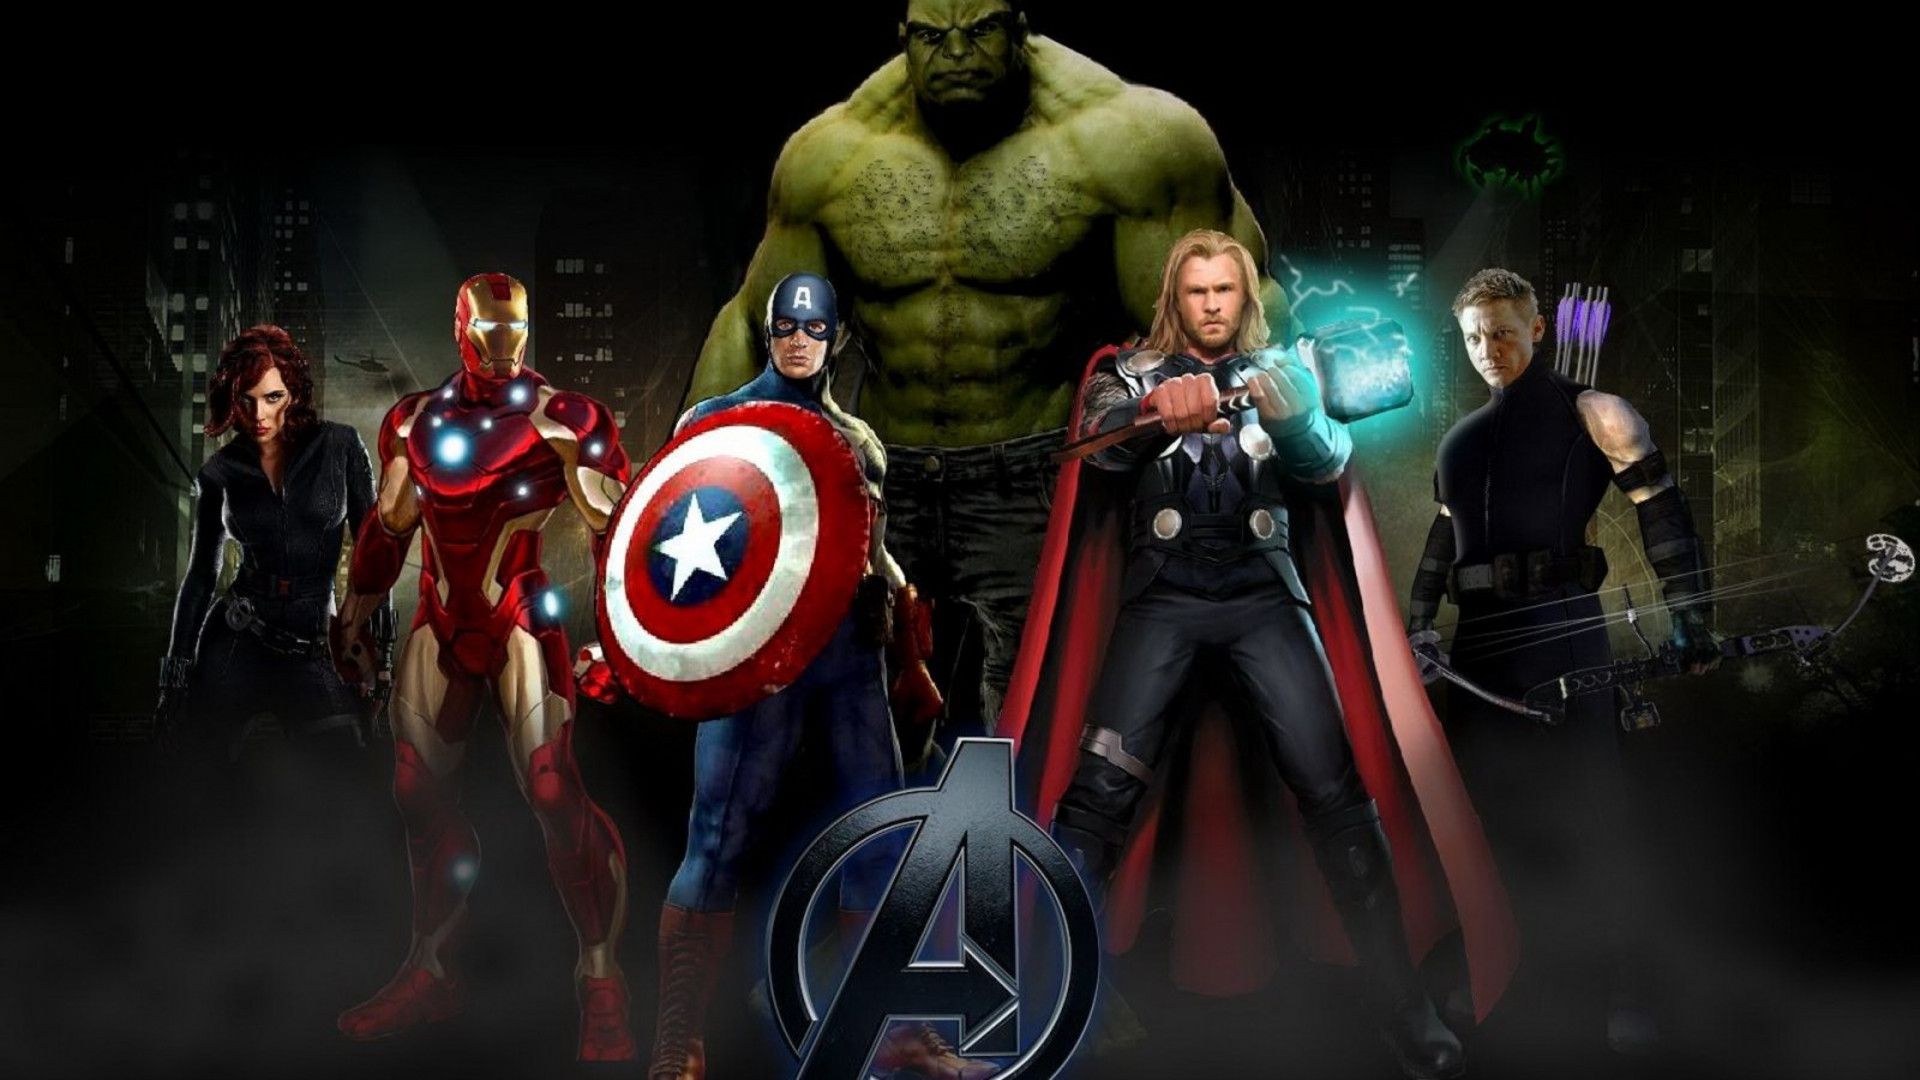 Collection Of Avengers Wallpaper Hd On Spyder Wallpapers - Avengers Wallpaper Hd - HD Wallpaper 